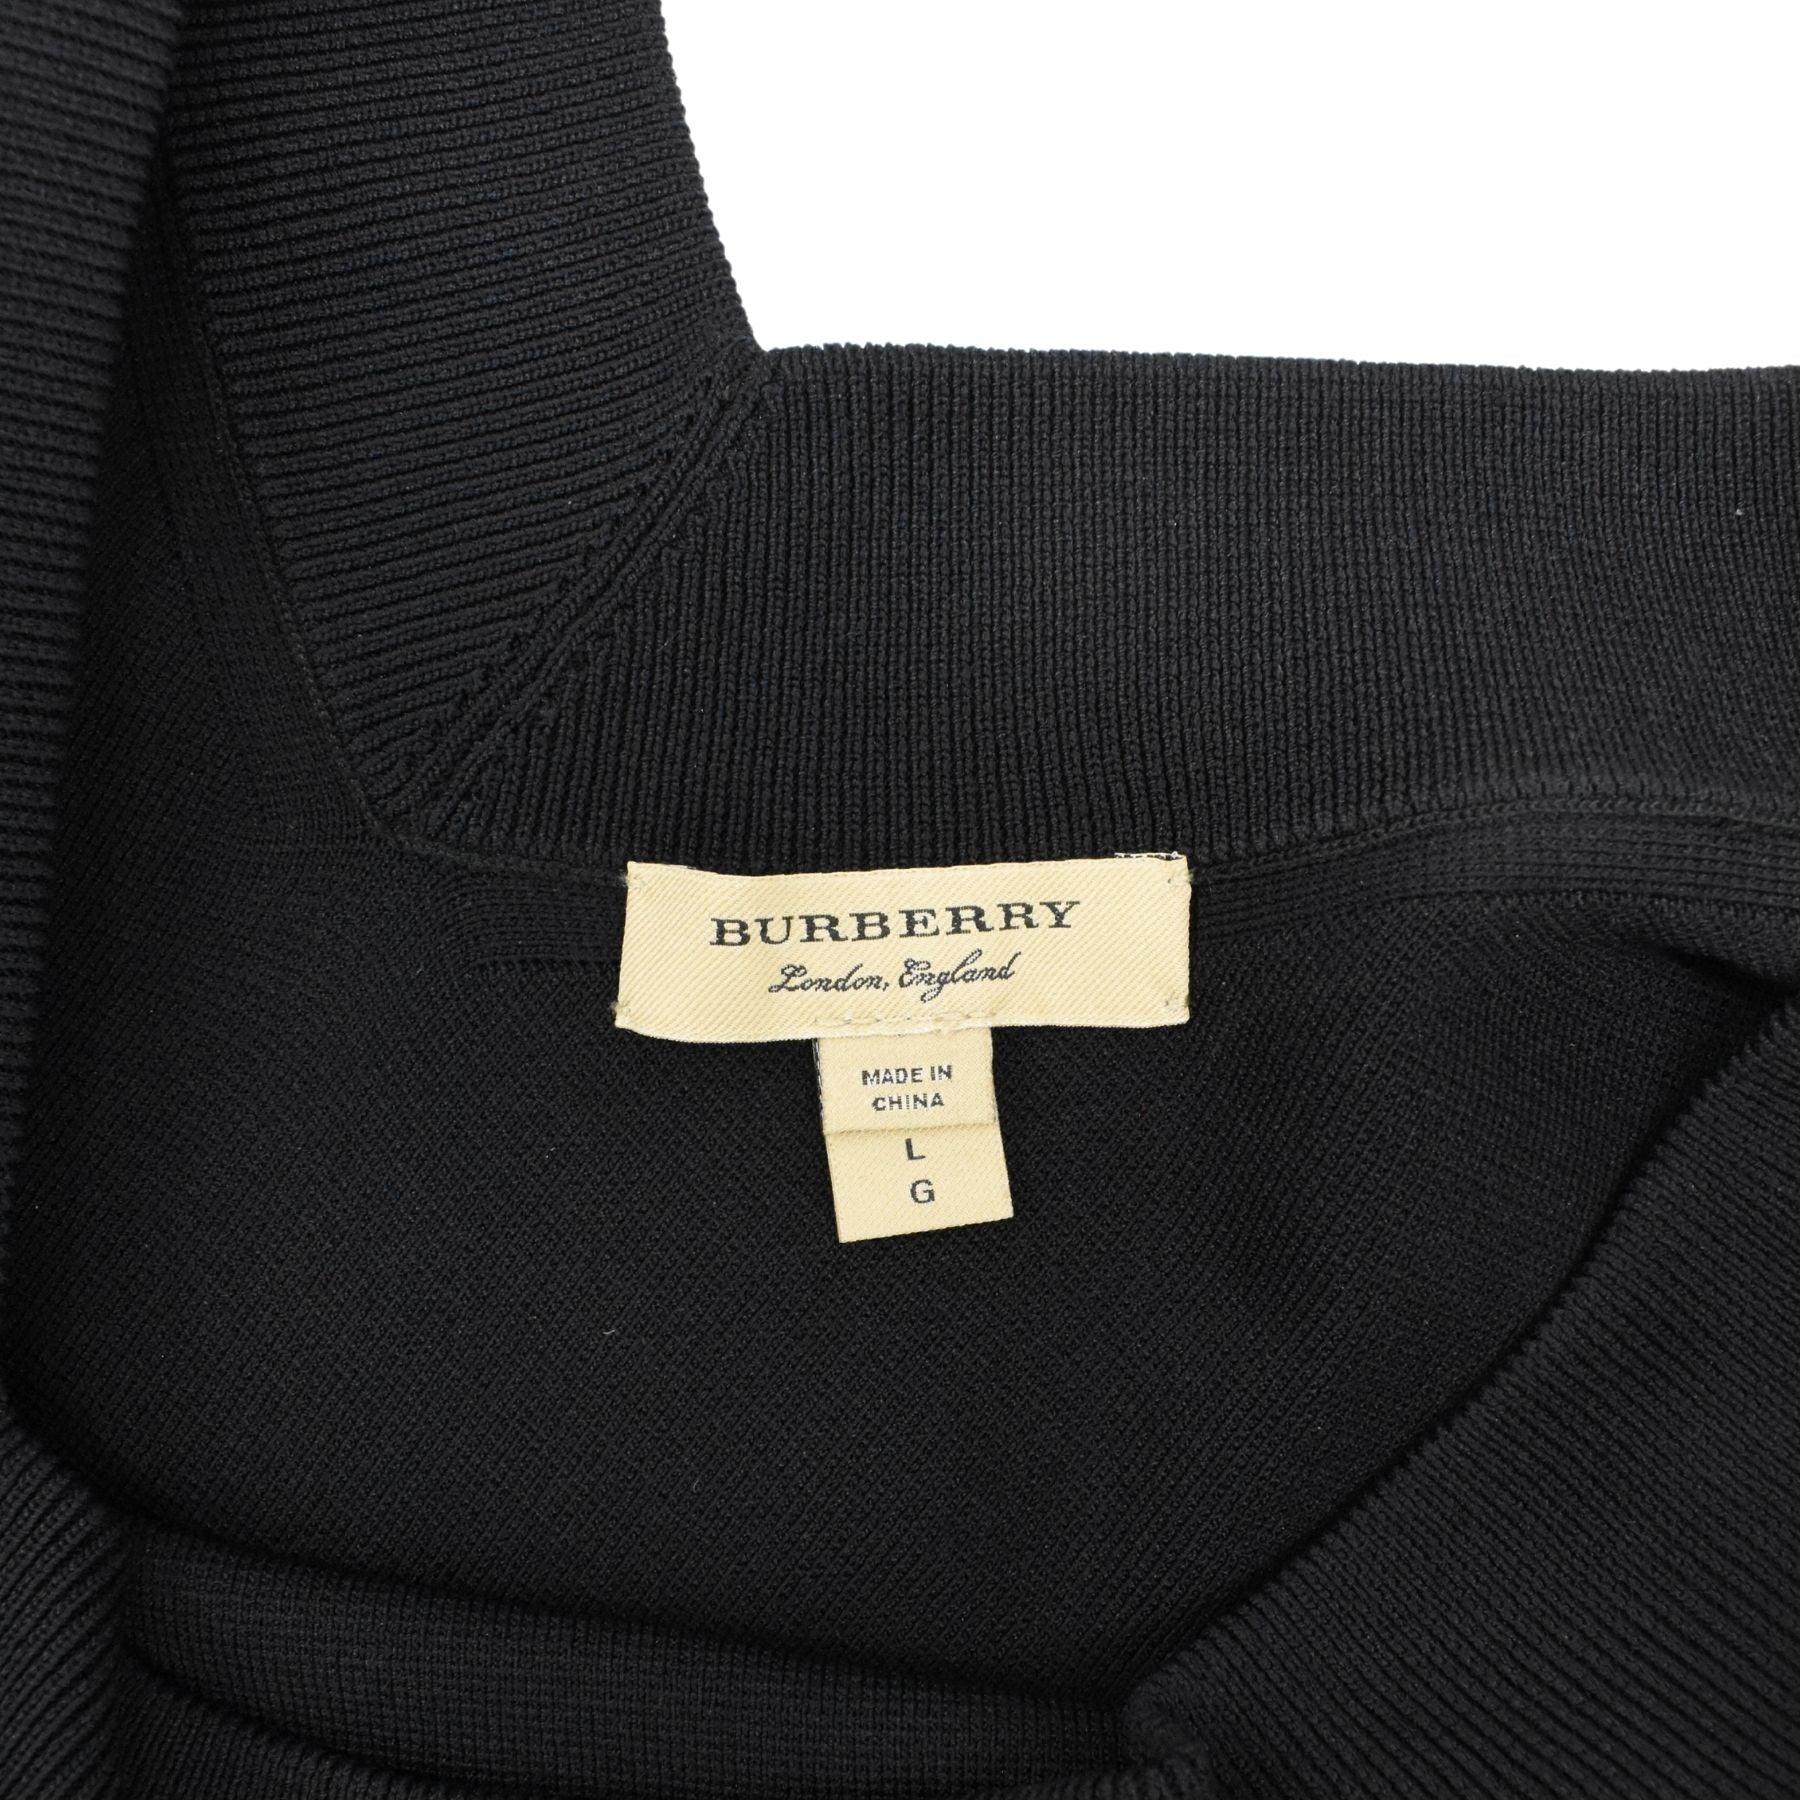 Burberry Dress - Women's L - Fashionably Yours